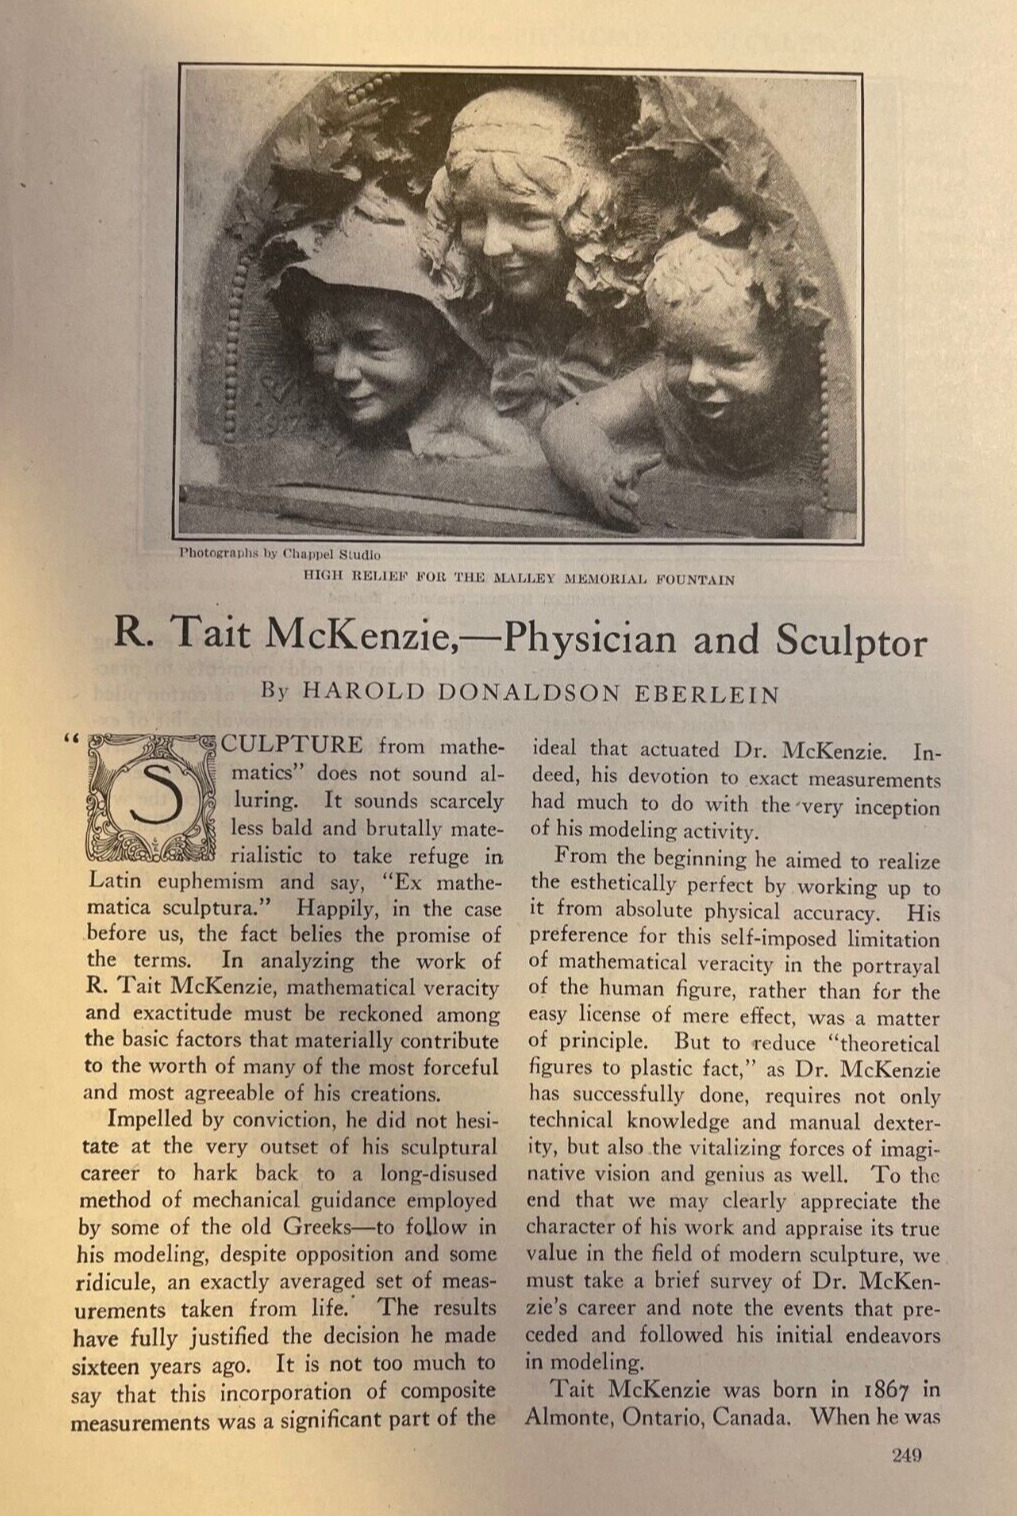 1918 R. Tait McKenzie Sculptor and Physician illustrated